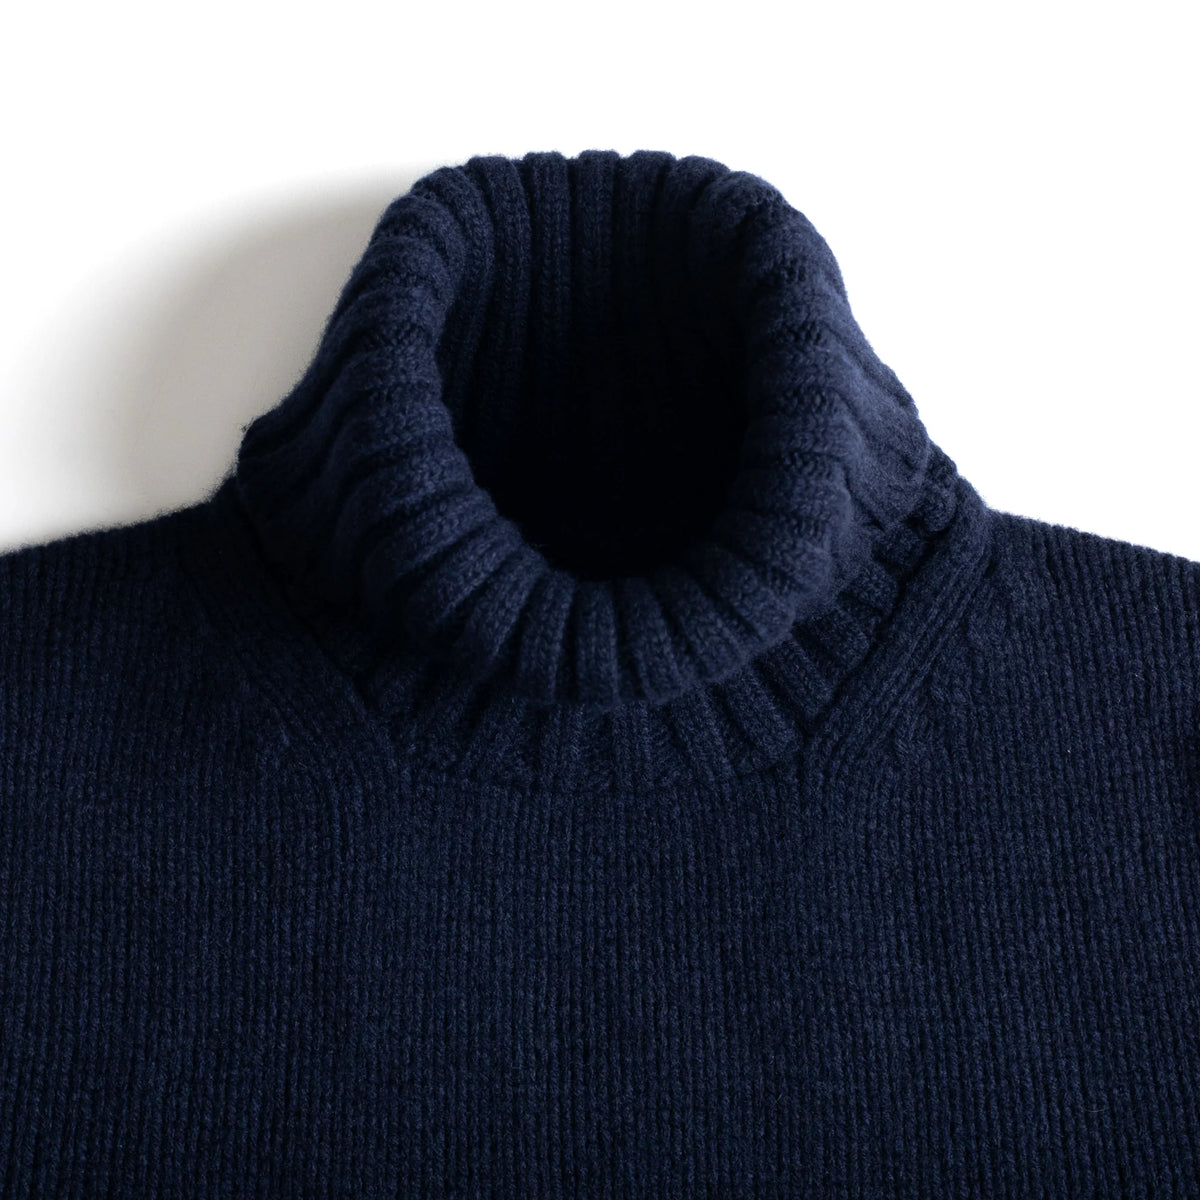 Navy Wool Cashmere Roll Neck